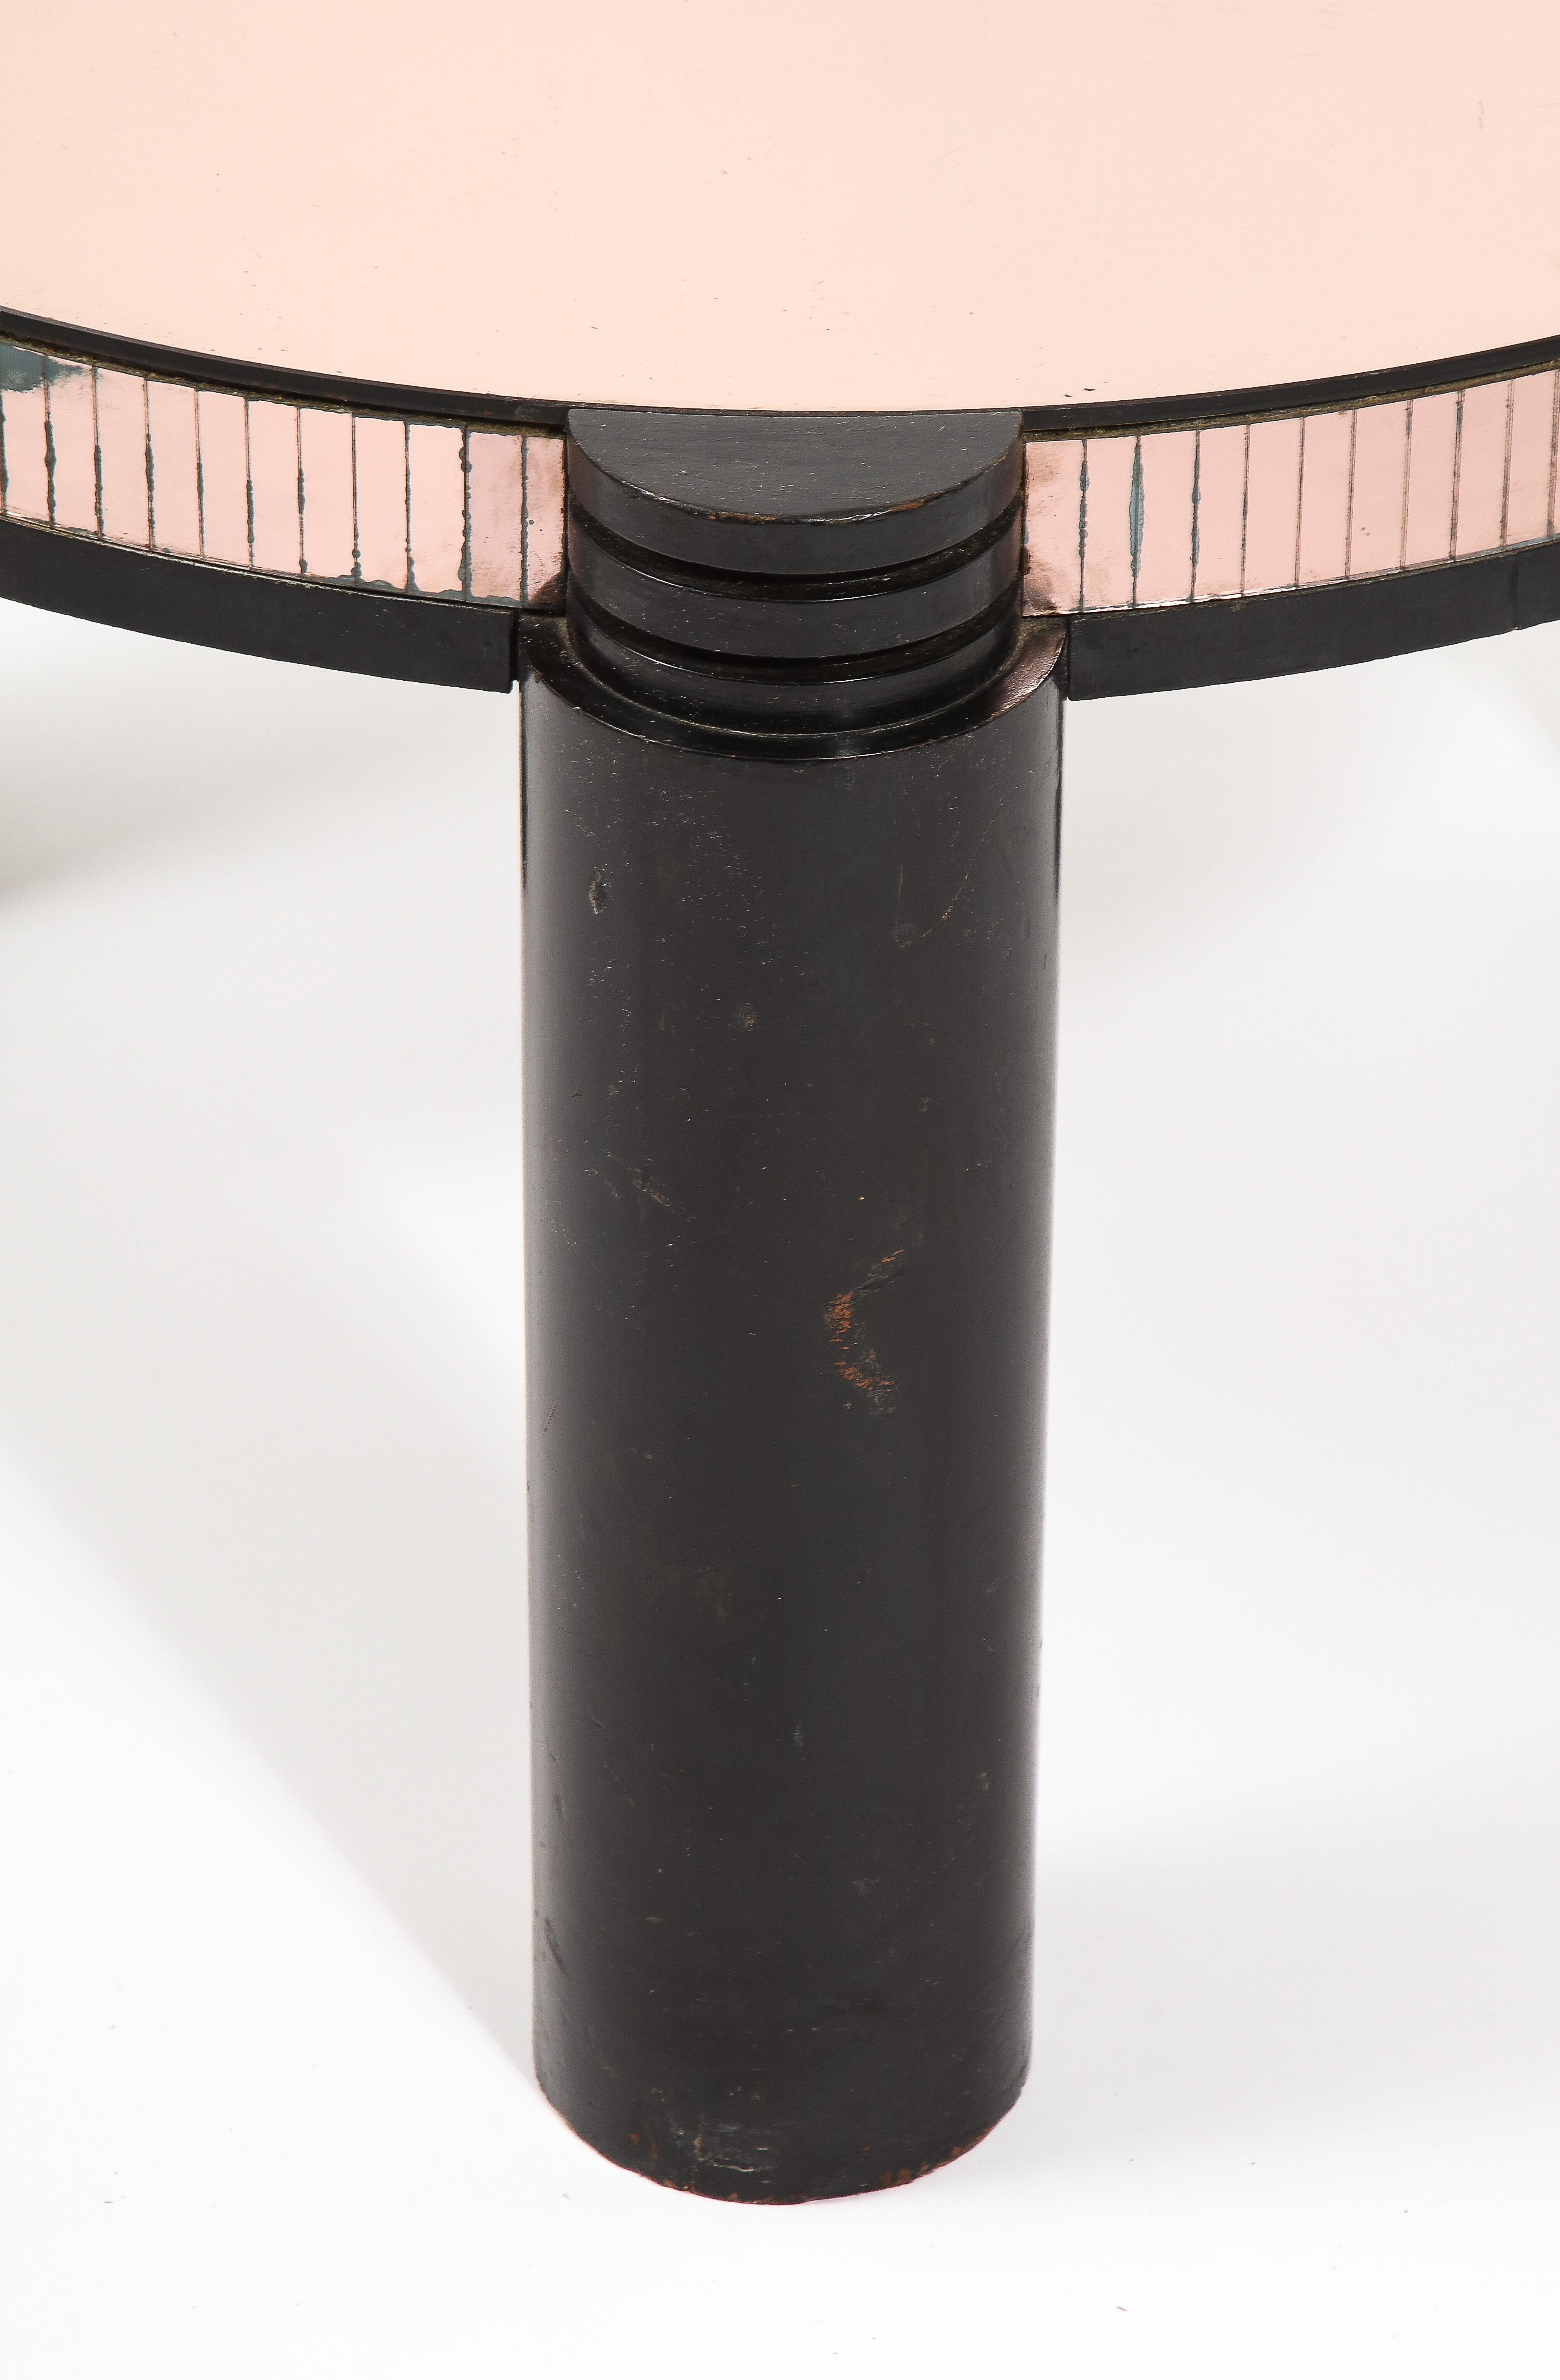 A round ebonized wood cocktail table with a pink mirrored top and edge, the legs have a grooved motif and are rounded on the outside. The table is in its original finish and can be fully restored on request.